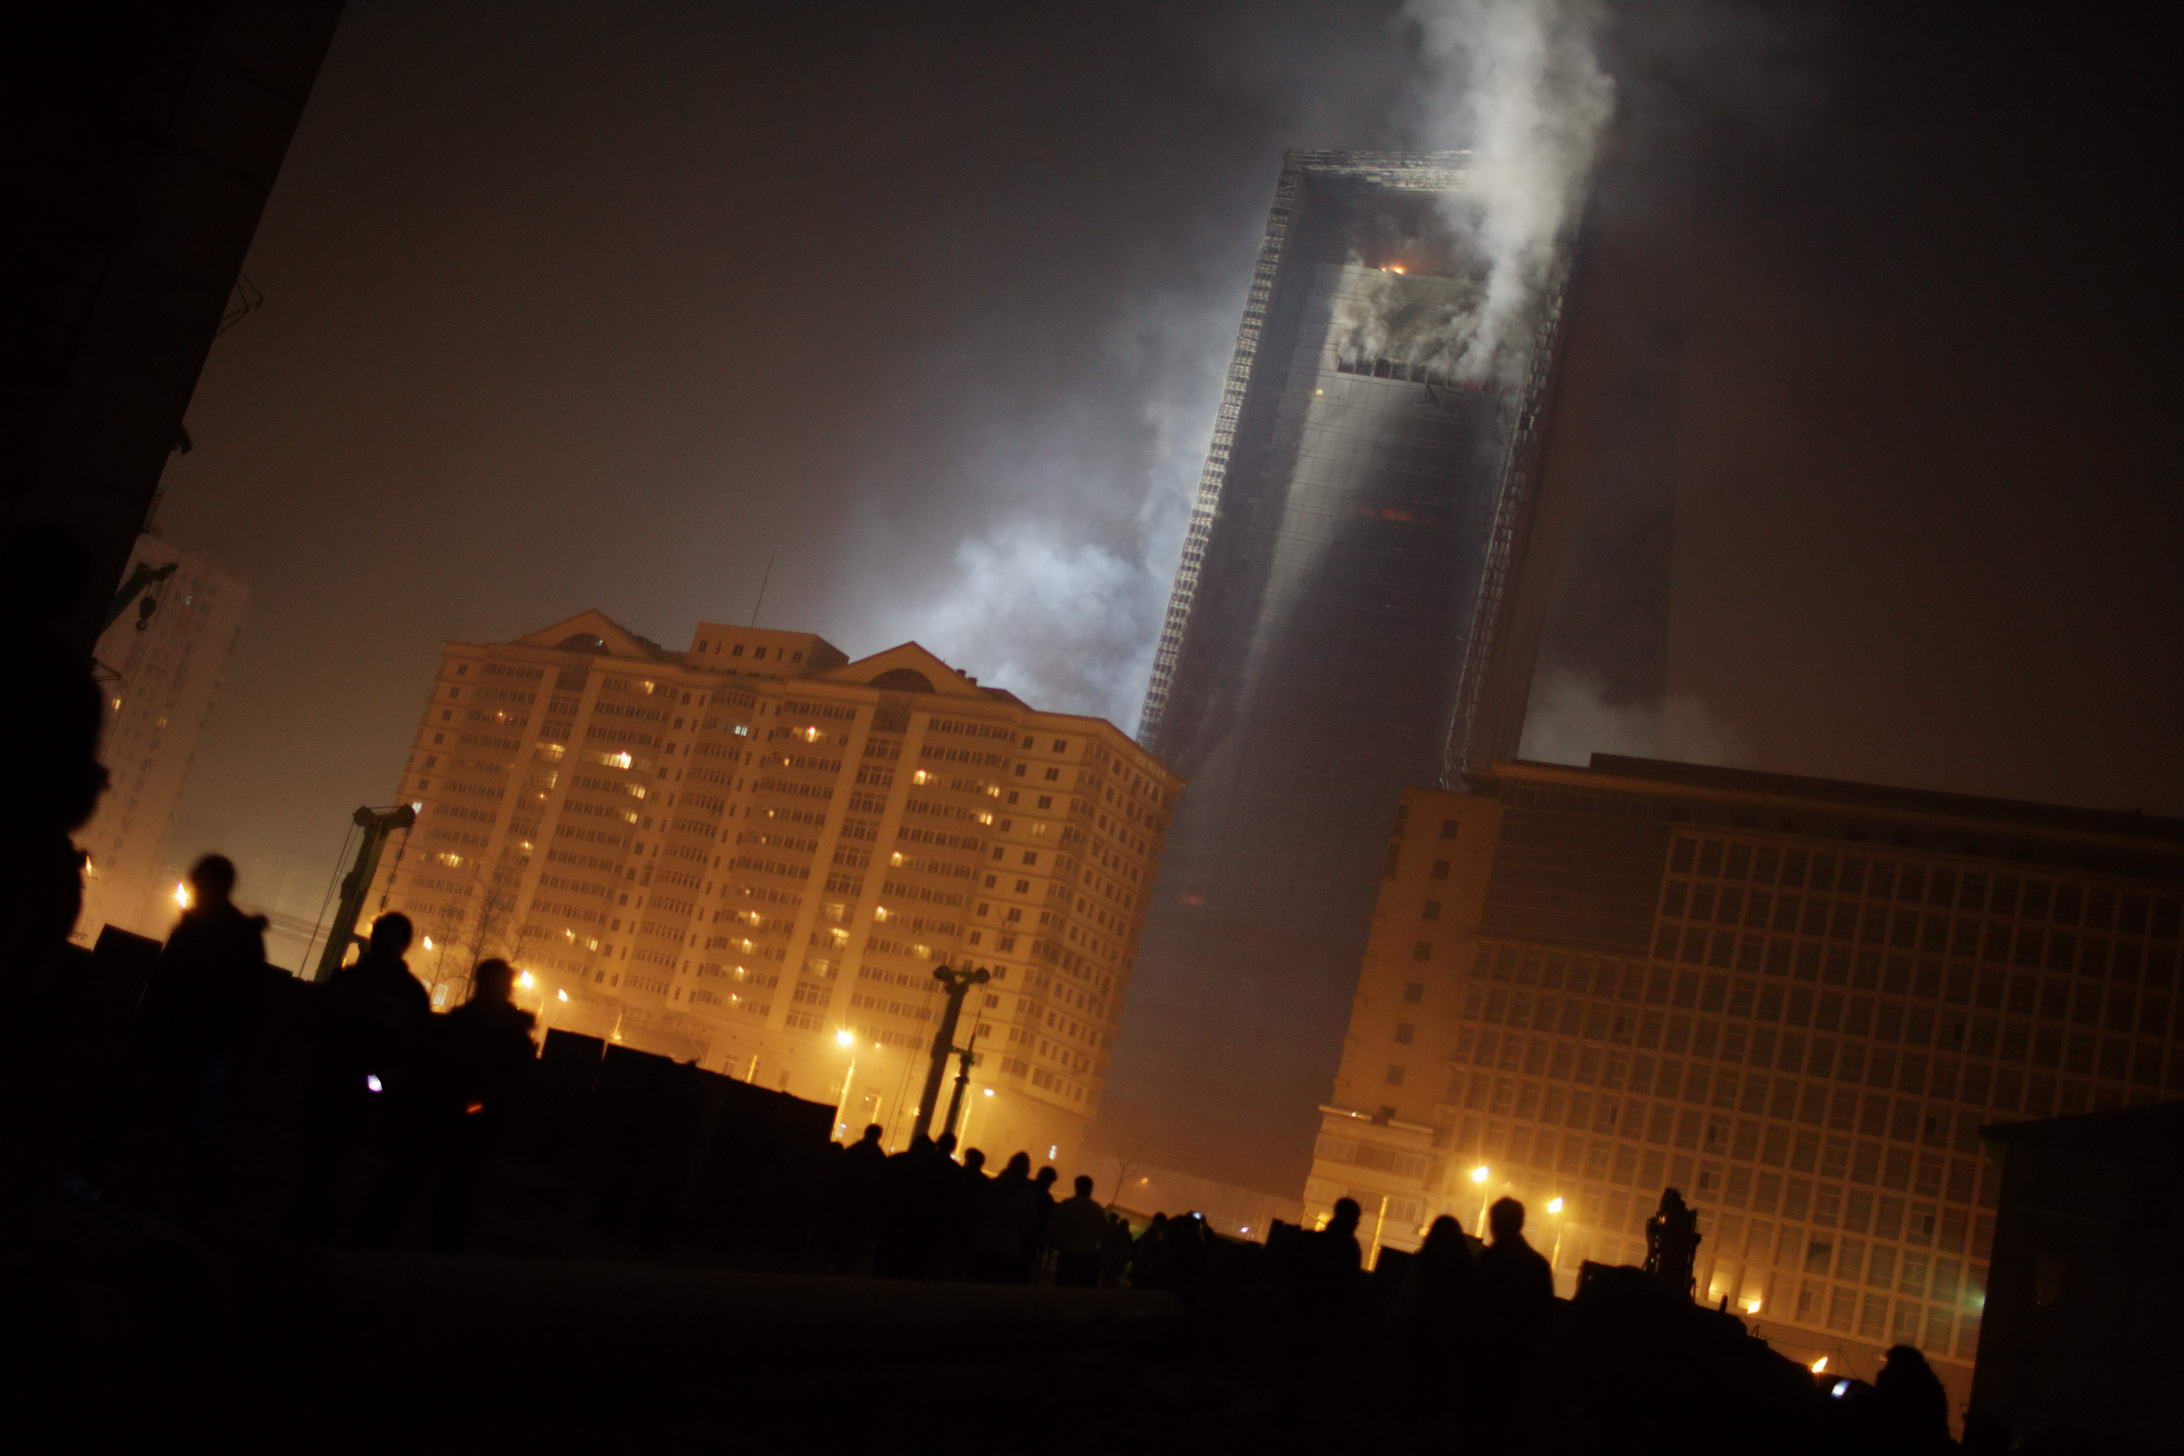 Throwback Thursday: February 9, 2009, the CCTV Tower Hotel Burns, with No Opening in Sight